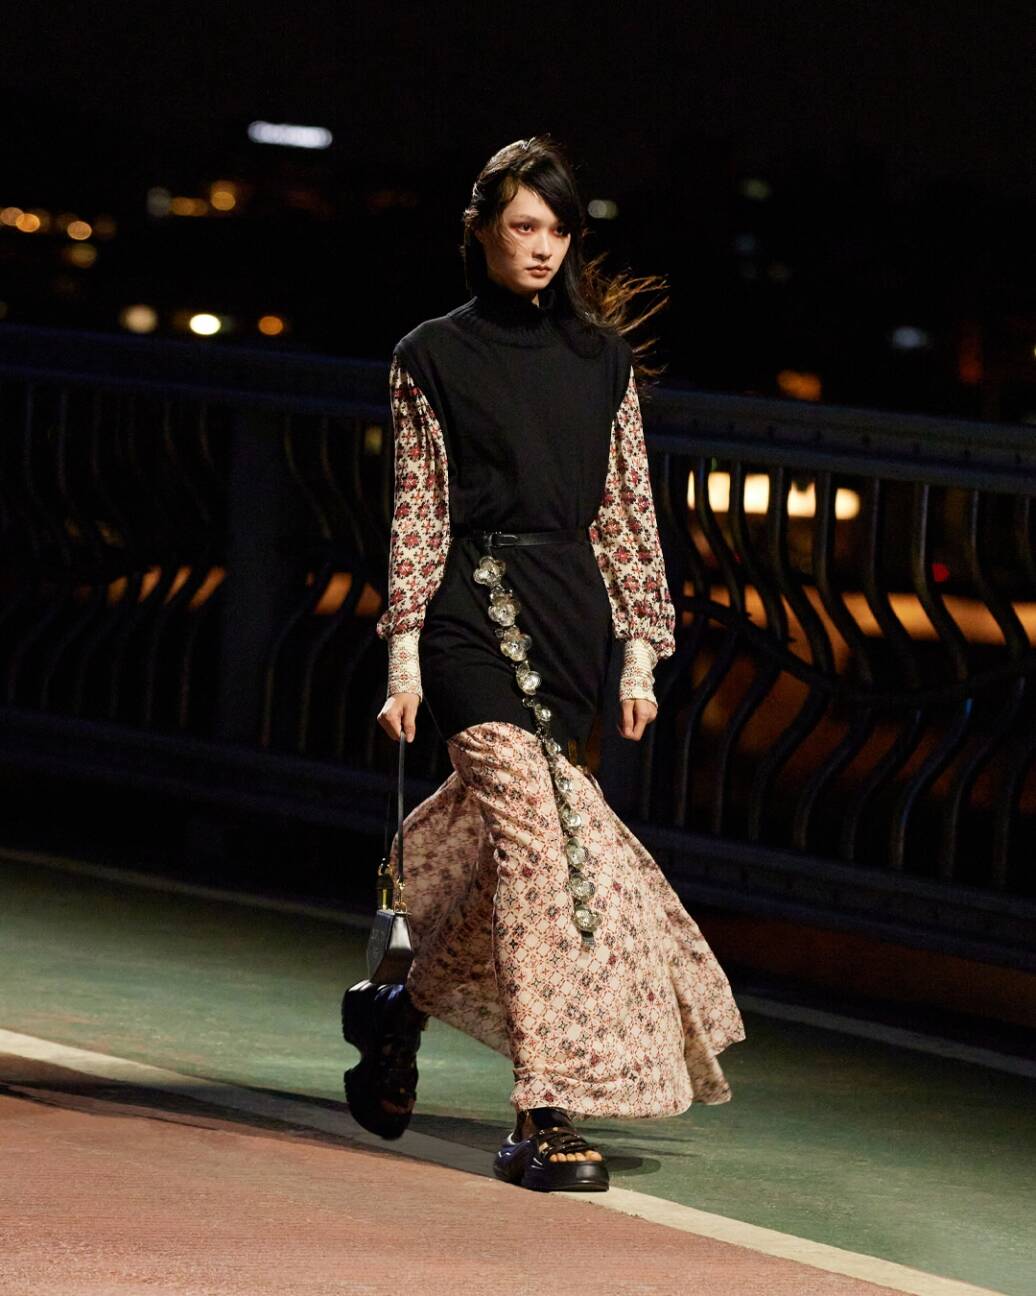 Louis Vuitton to hold its first Prefall show at Jamsugyo Bridge